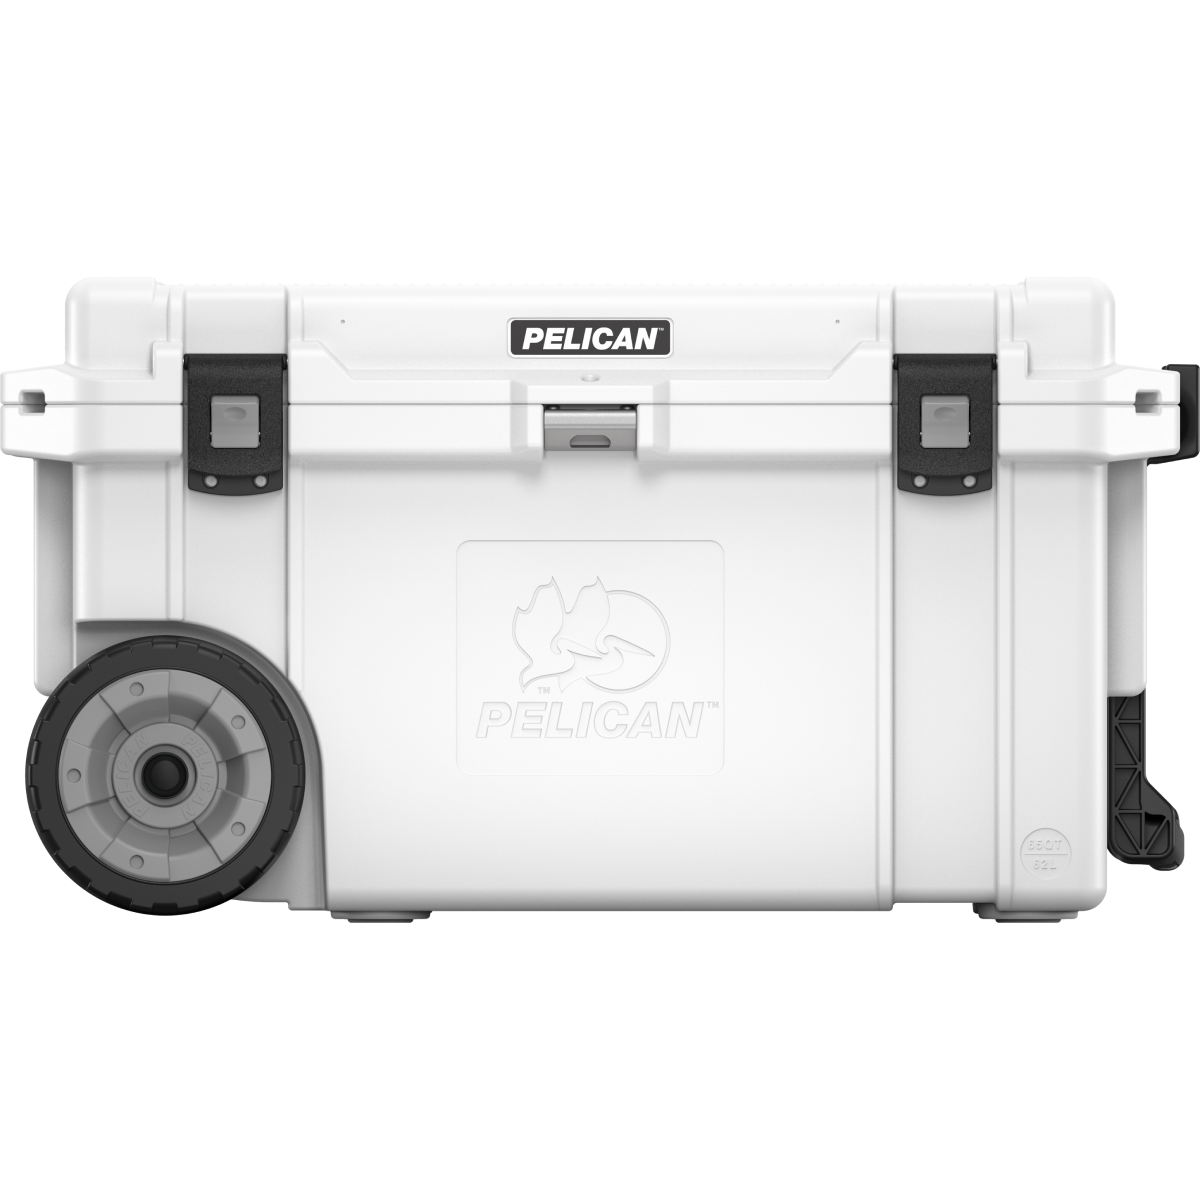 Pelican 65QT Wheeled White Front